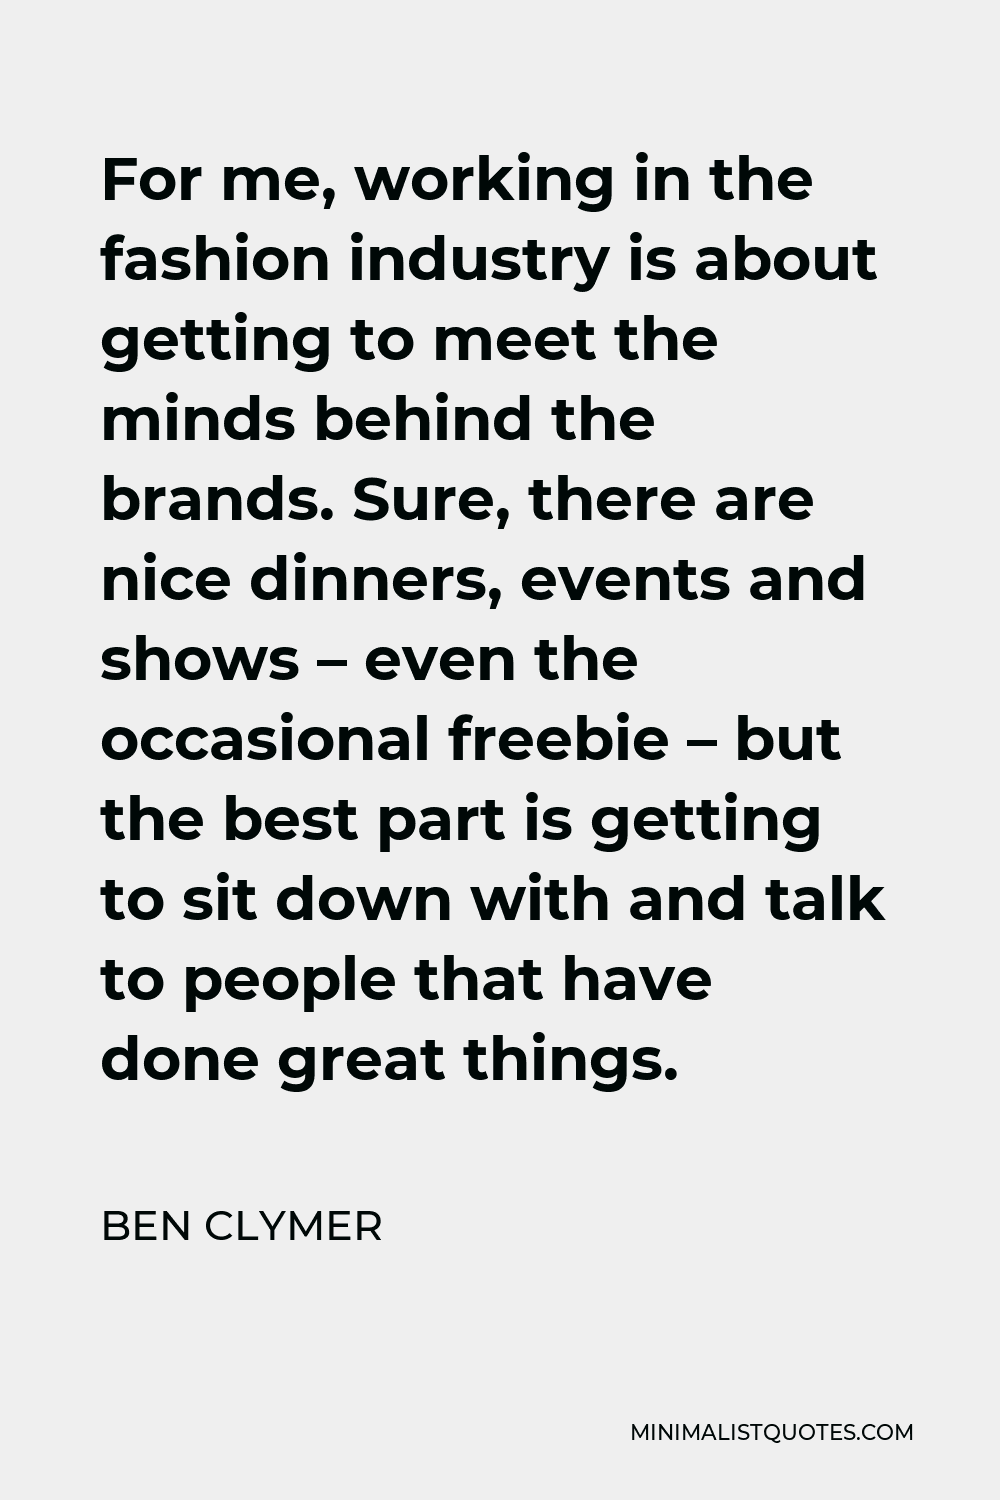 Ben Clymer Quote - For me, working in the fashion industry is about getting to meet the minds behind the brands. Sure, there are nice dinners, events and shows – even the occasional freebie – but the best part is getting to sit down with and talk to people that have done great things.